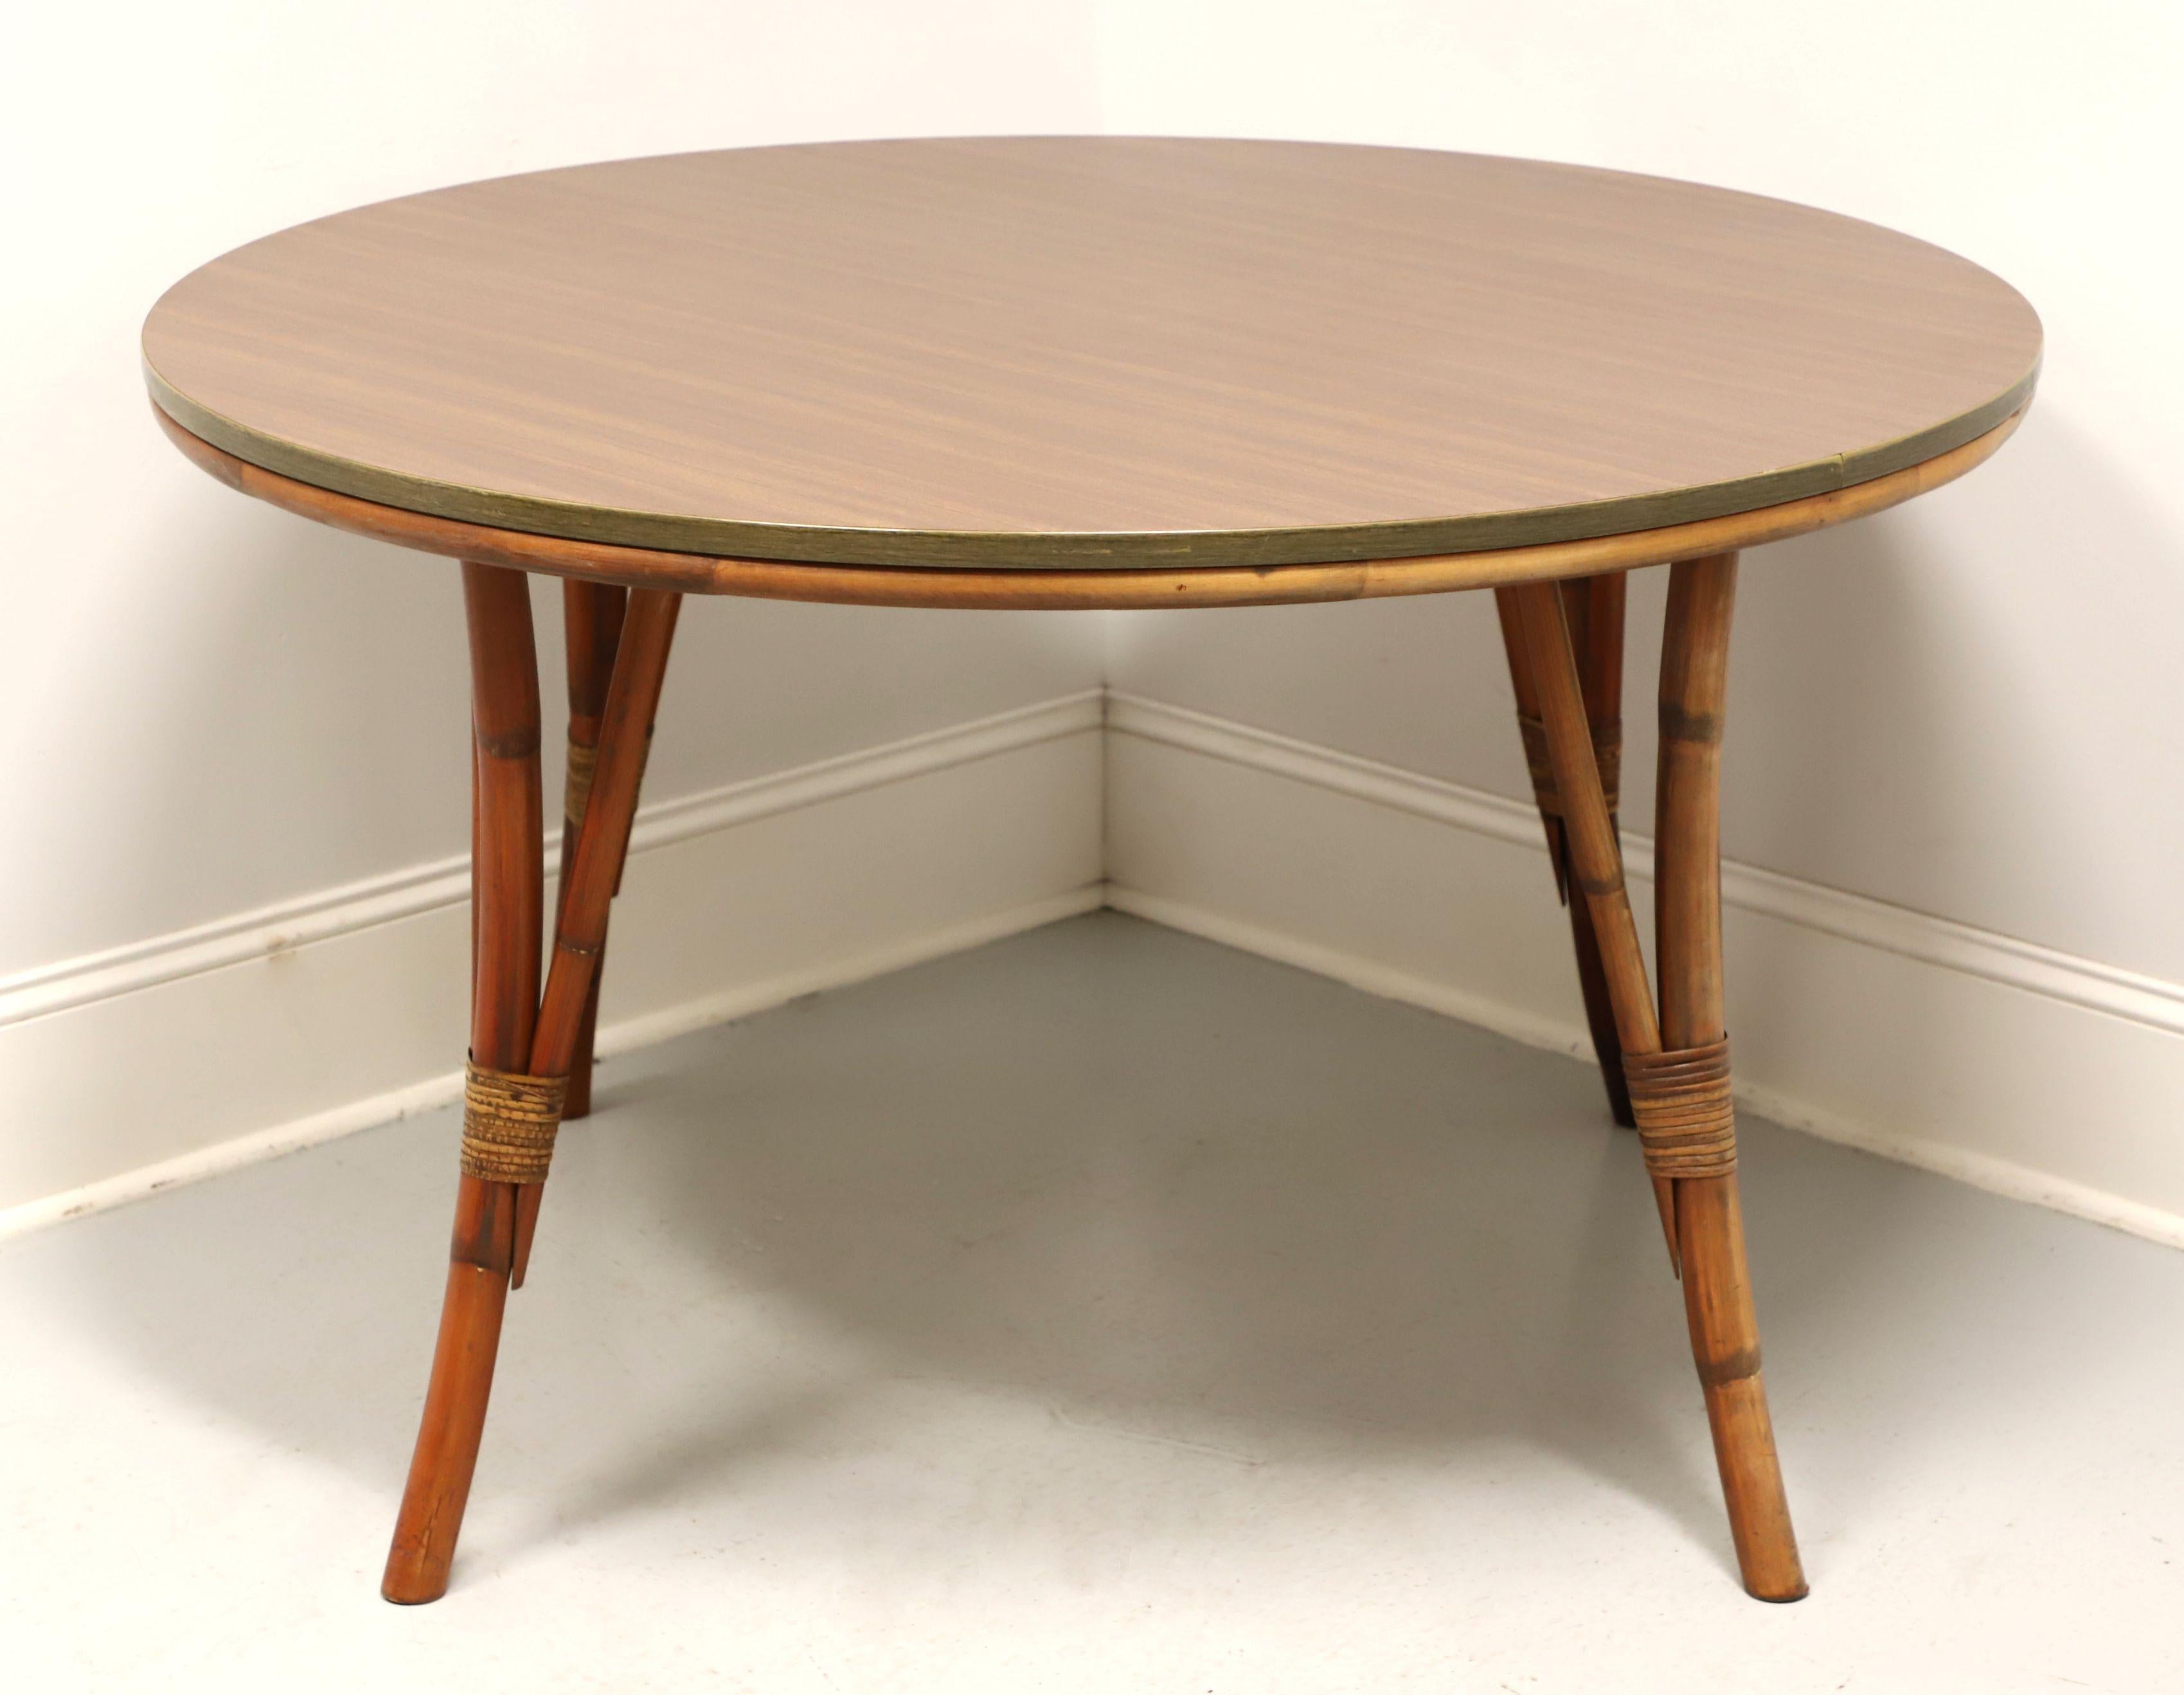 A mid 20th century Coastal style dining table by Bam-Tan Products. Rattan with a distinctive mid century modern style, laminate wood grain top, wood grain metal edge, rattan apron, and flared three-prong round legs with decorative rattan strapping.